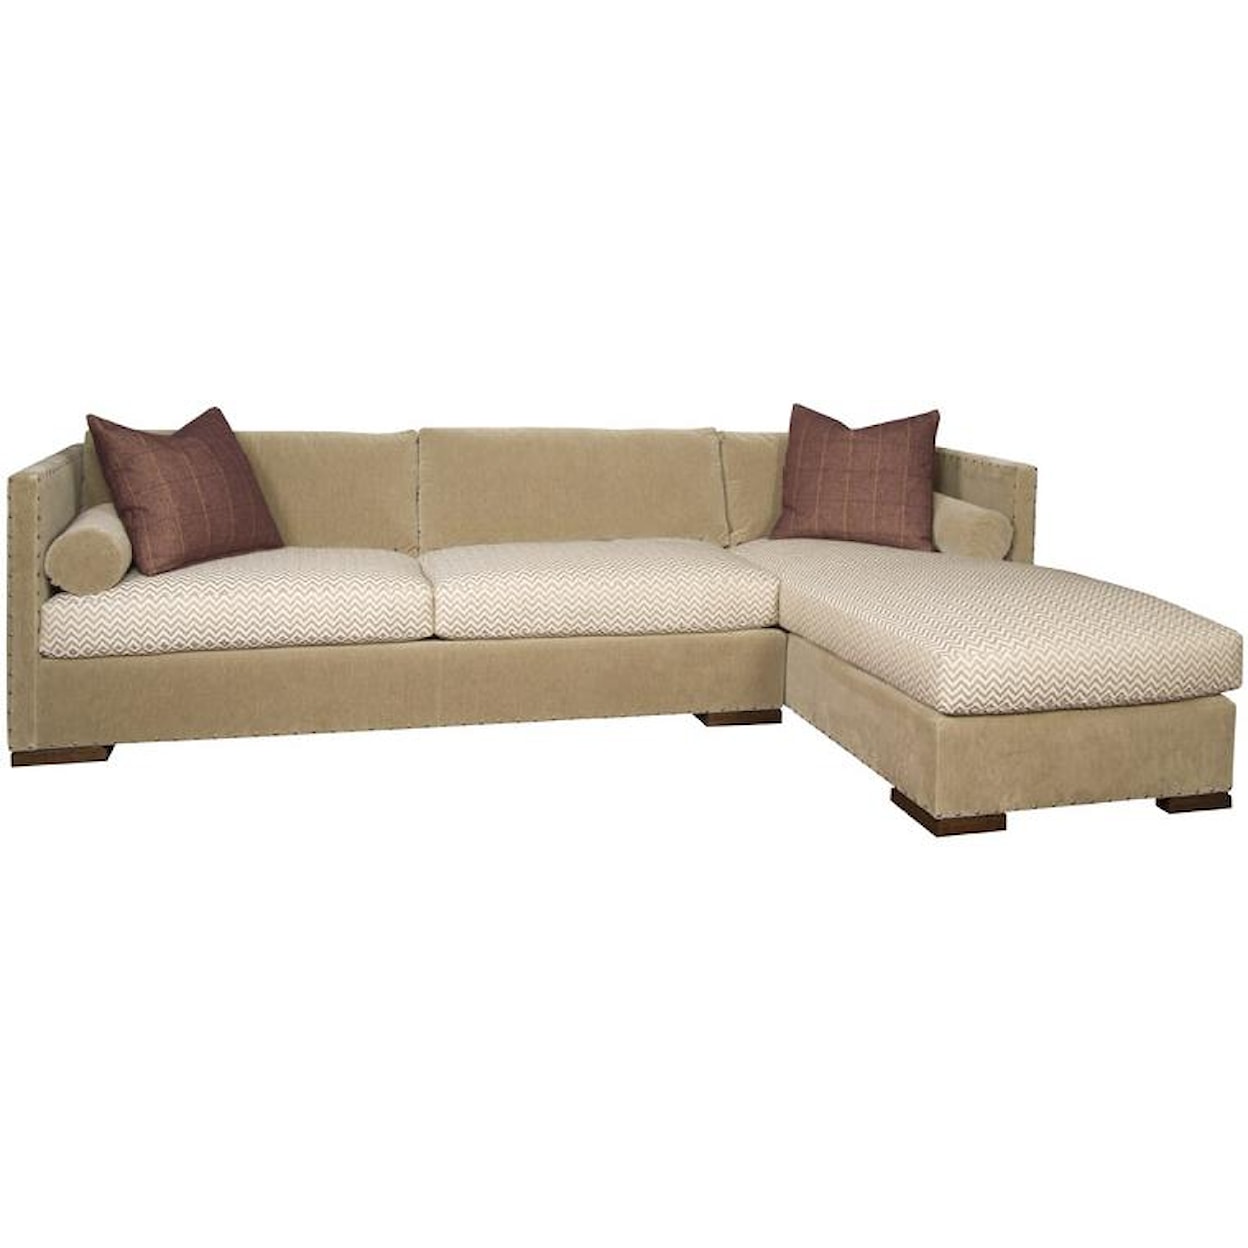 Vanguard Furniture Thom Filicia Home Collection Sectional Sofa with Chaise